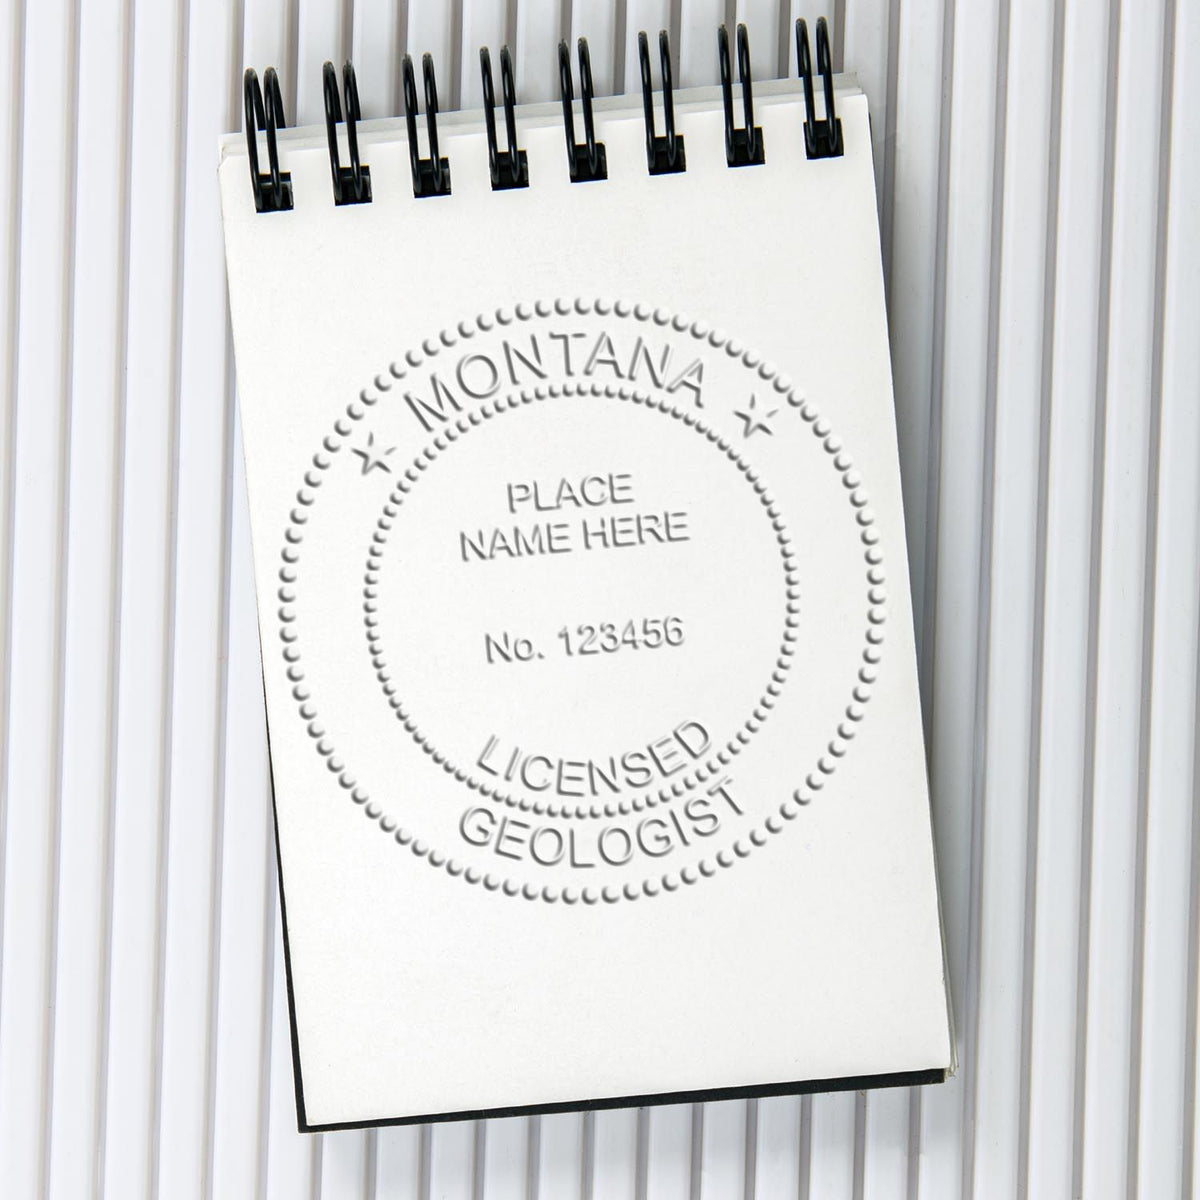 A stamped imprint of the State of Montana Extended Long Reach Geologist Seal in this stylish lifestyle photo, setting the tone for a unique and personalized product.